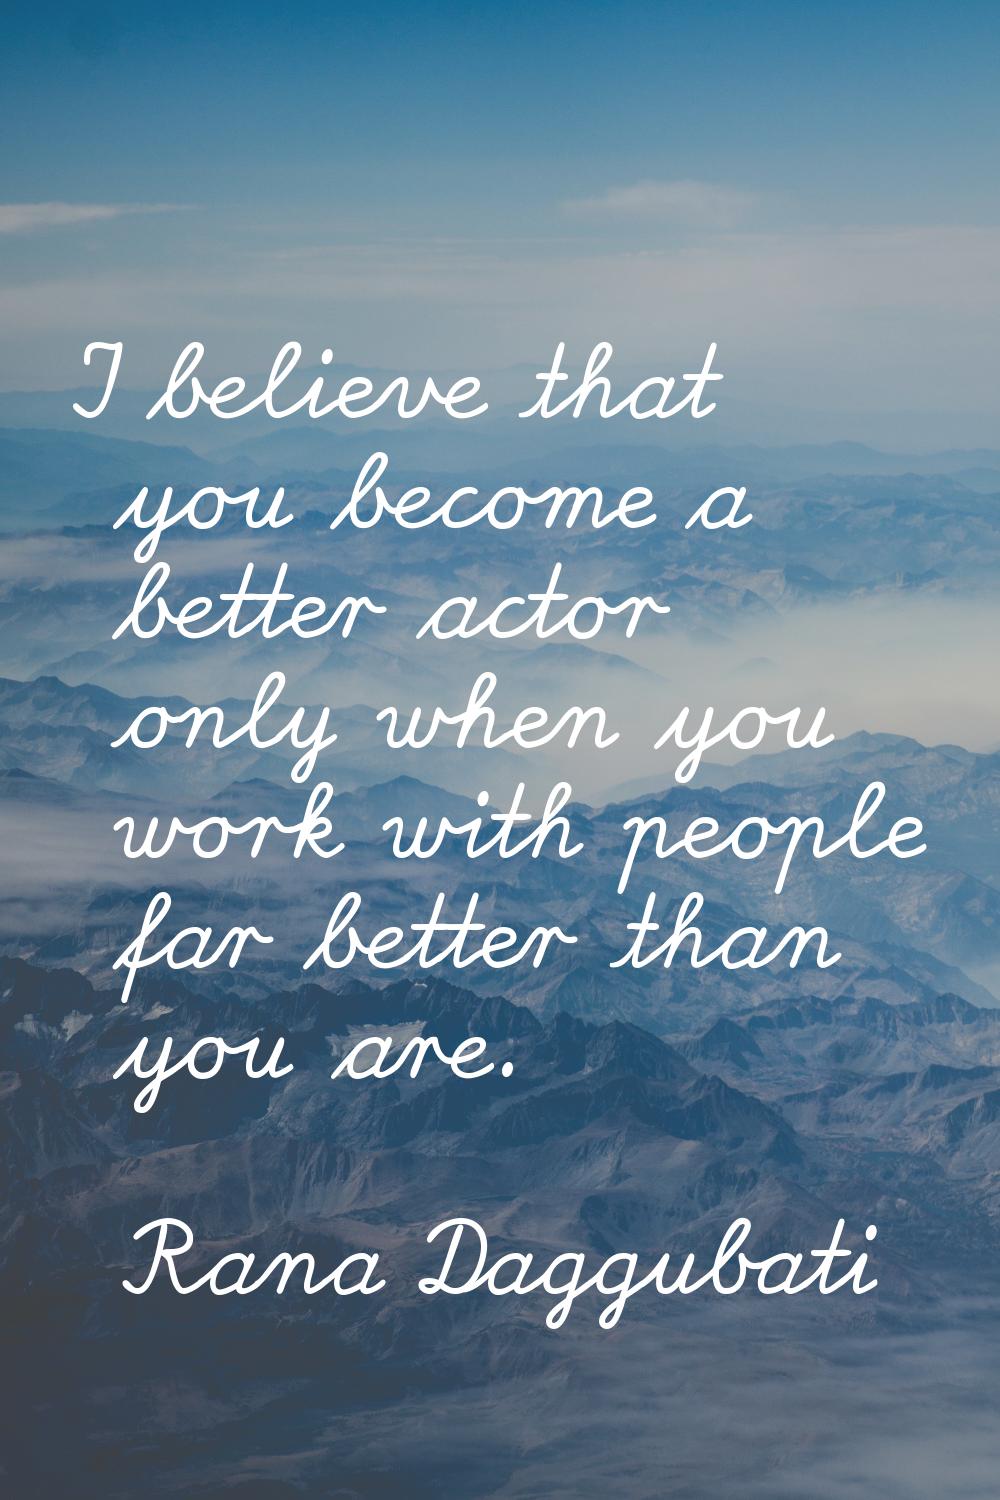 I believe that you become a better actor only when you work with people far better than you are.